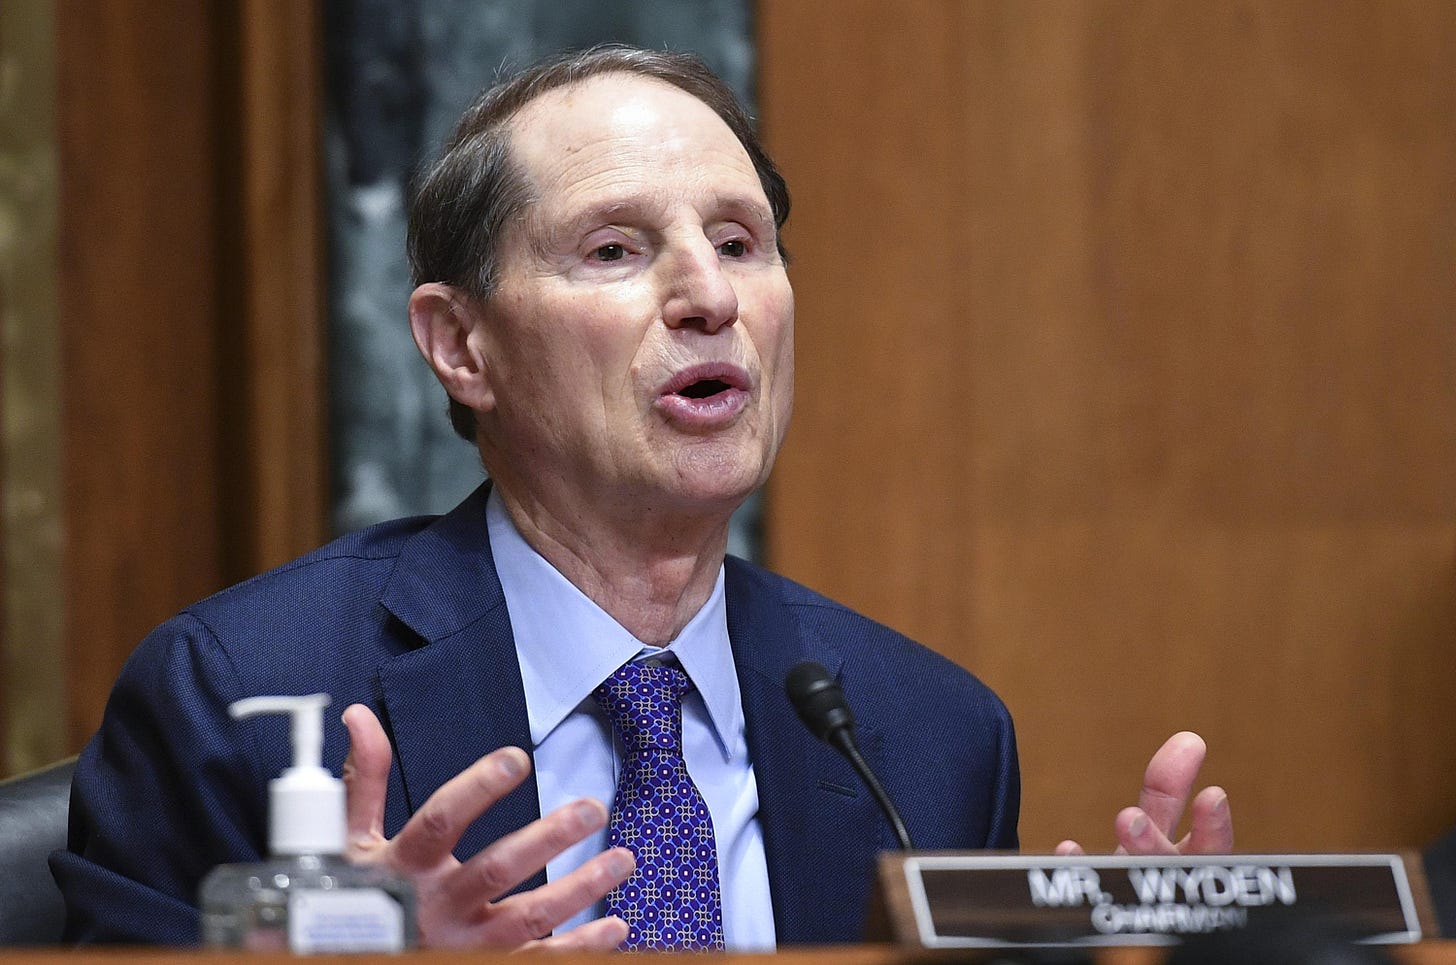 Democrat Ron Wyden wins reelection to US Senate from Oregon | AP News